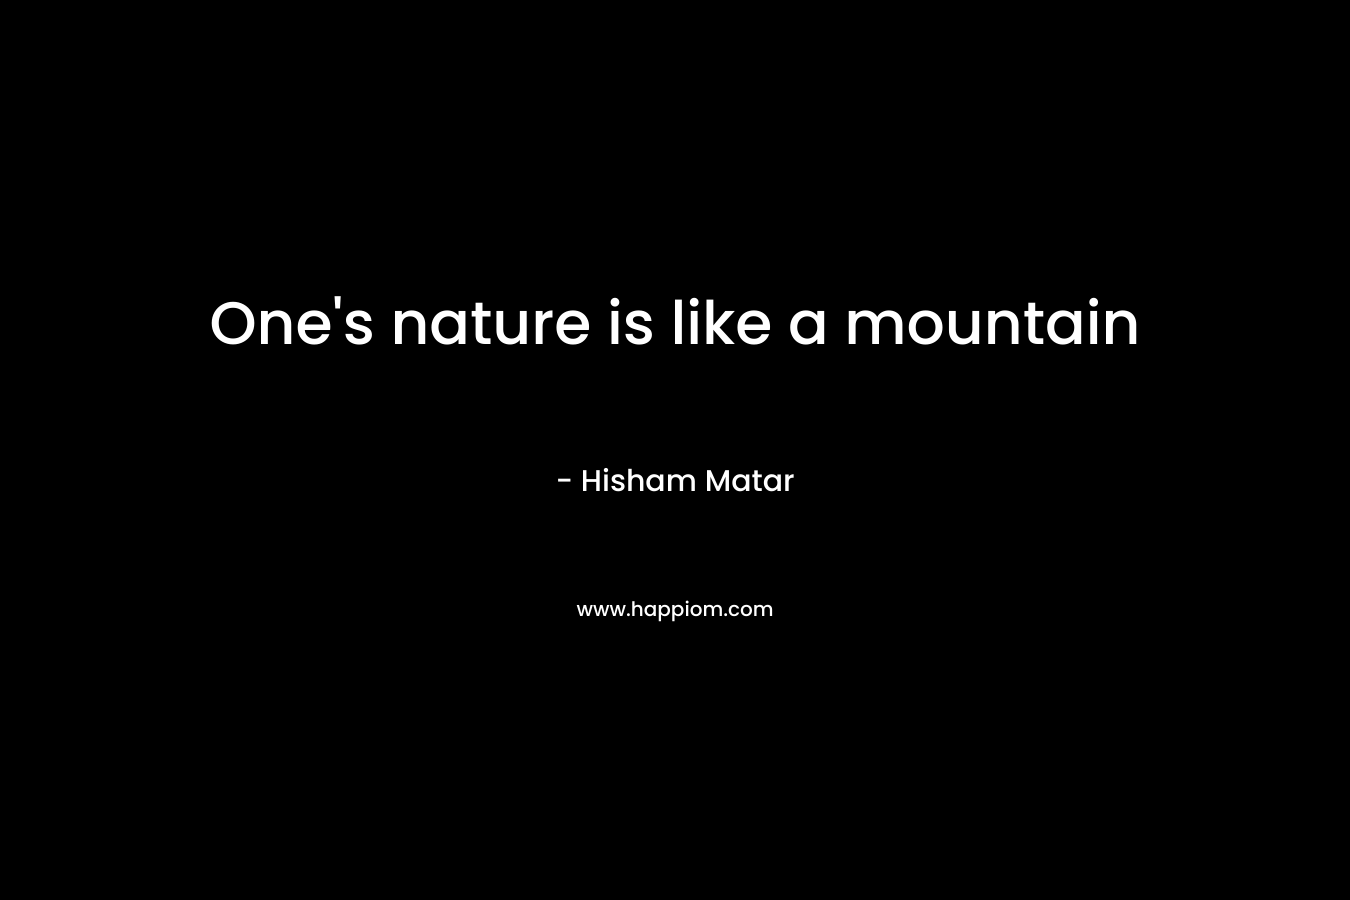 One's nature is like a mountain